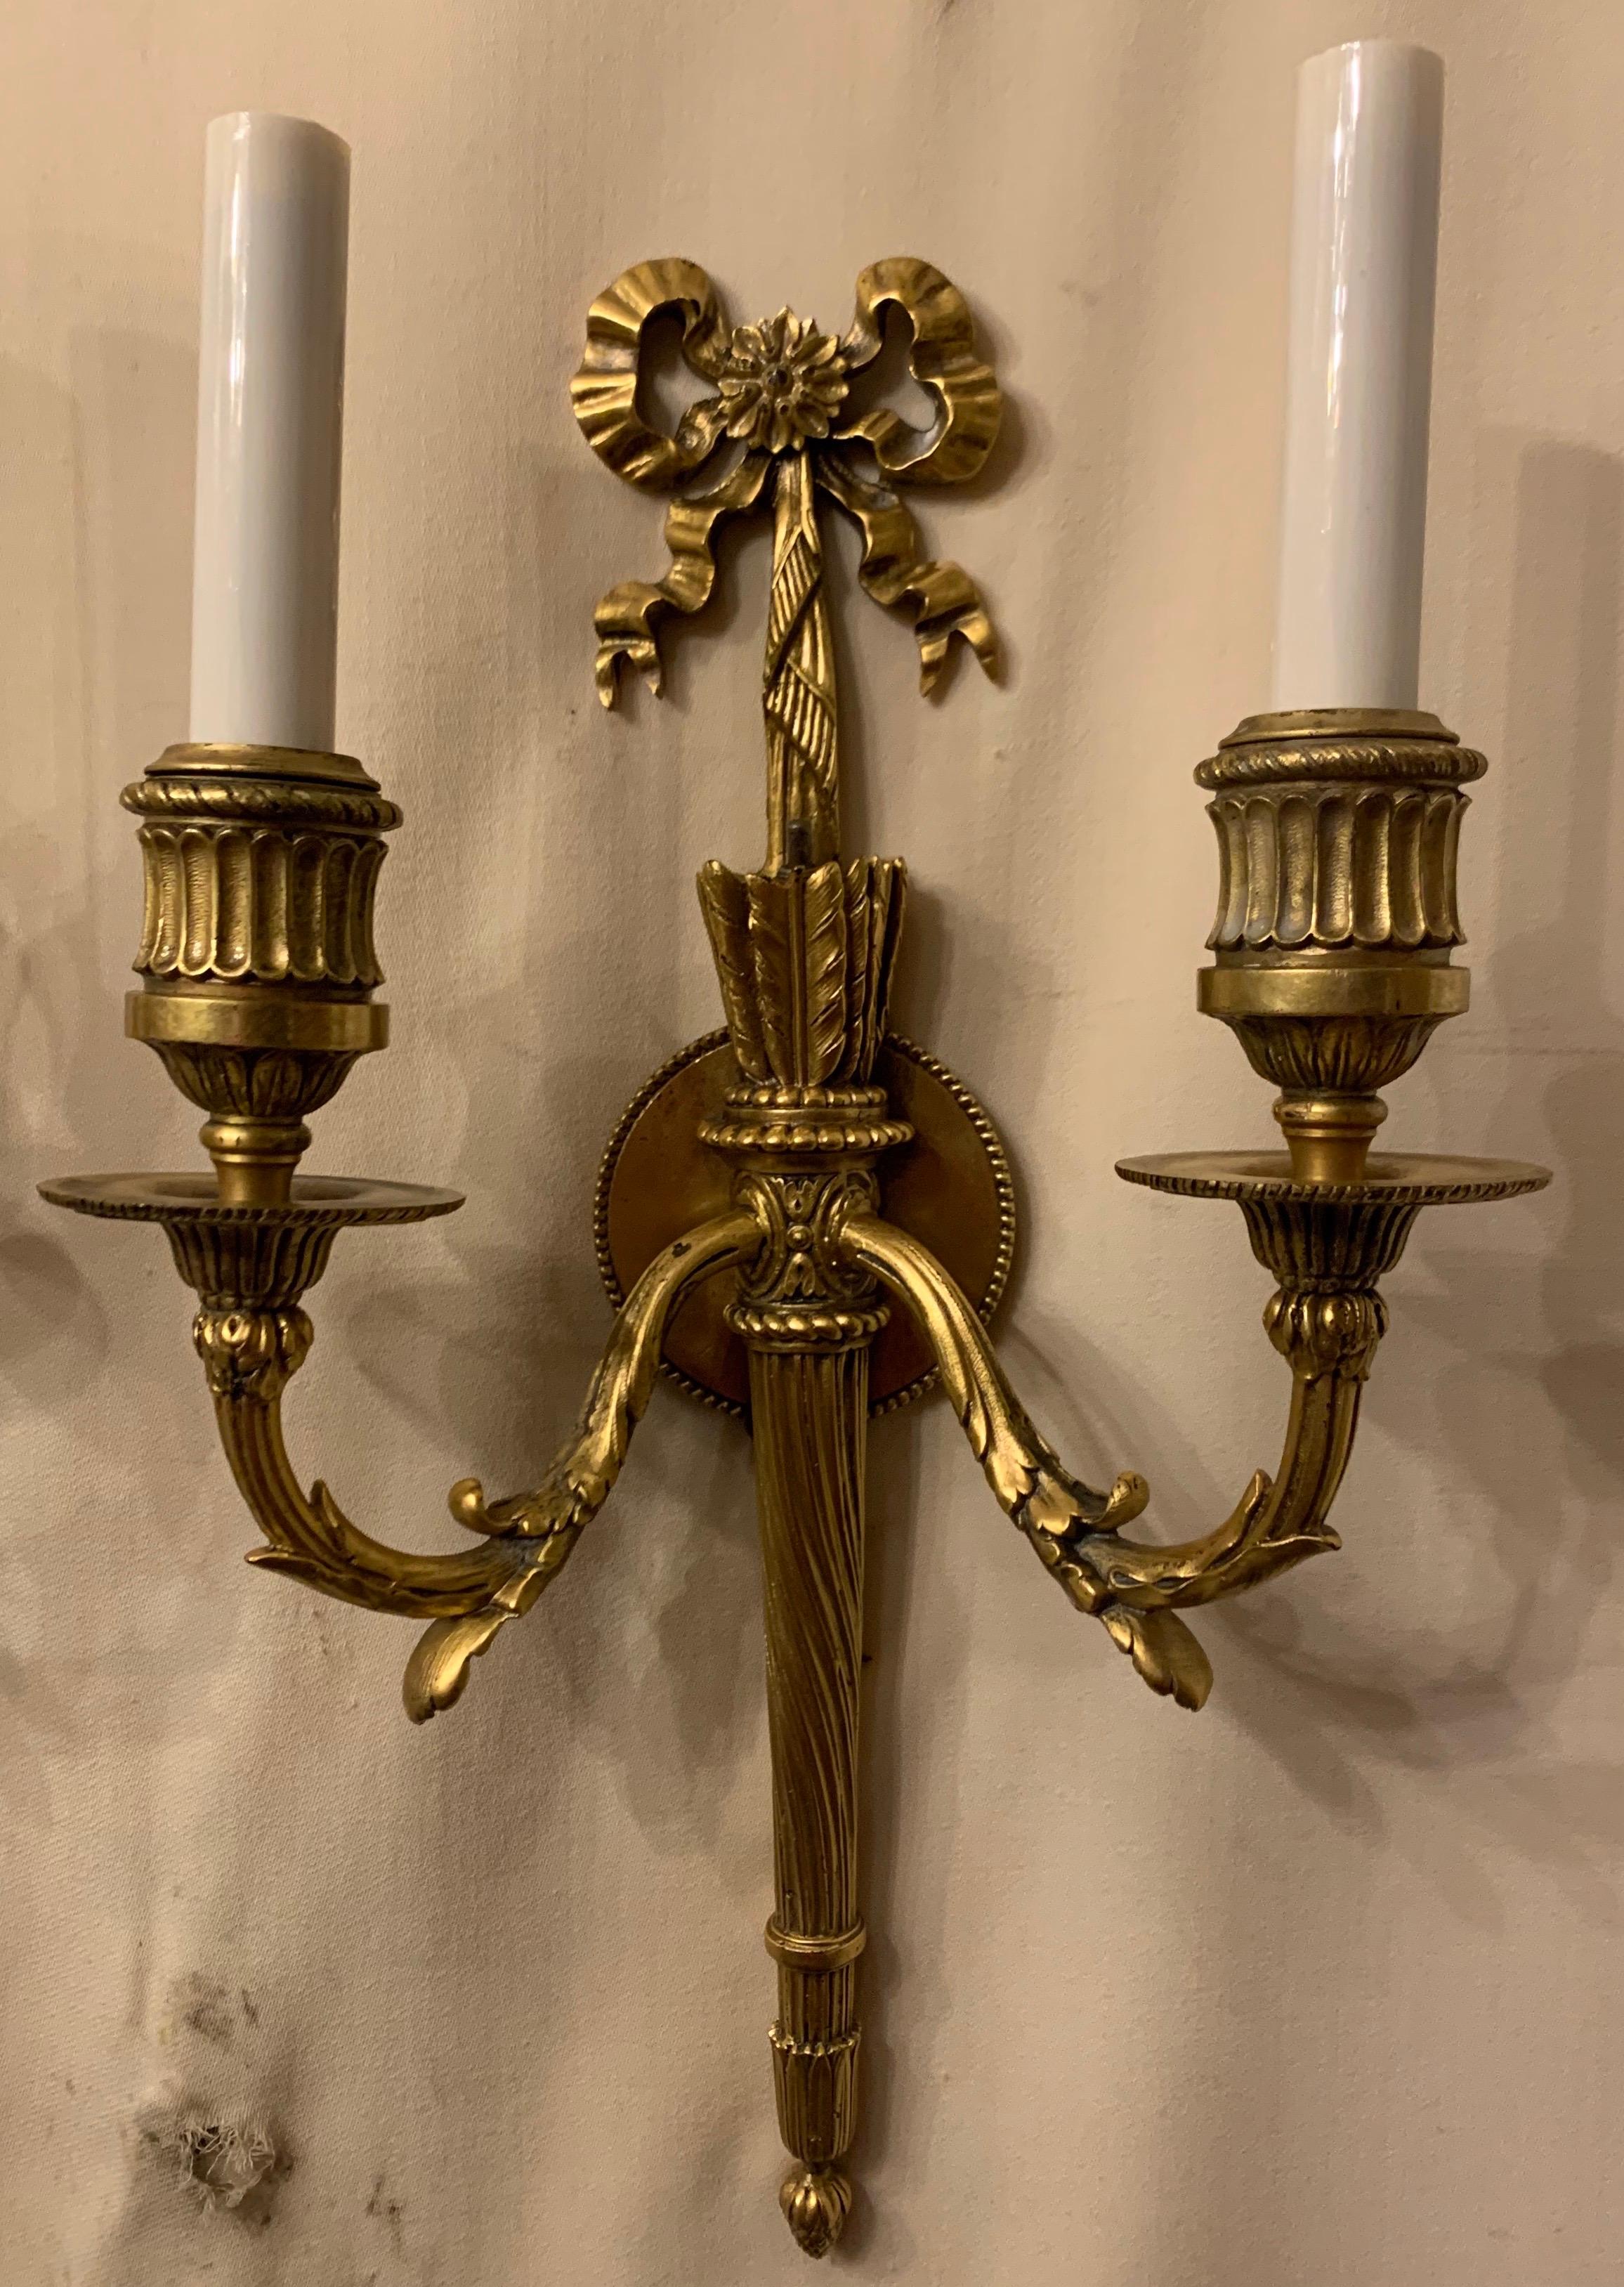 A wonderful pair of French gilt doré bronze bow top and back plate, torchiere two-light neoclassical sconces in the manner of E.F. Caldwell.
Completely rewired and ready to install and enjoy.
Approximate measurements:
15.5